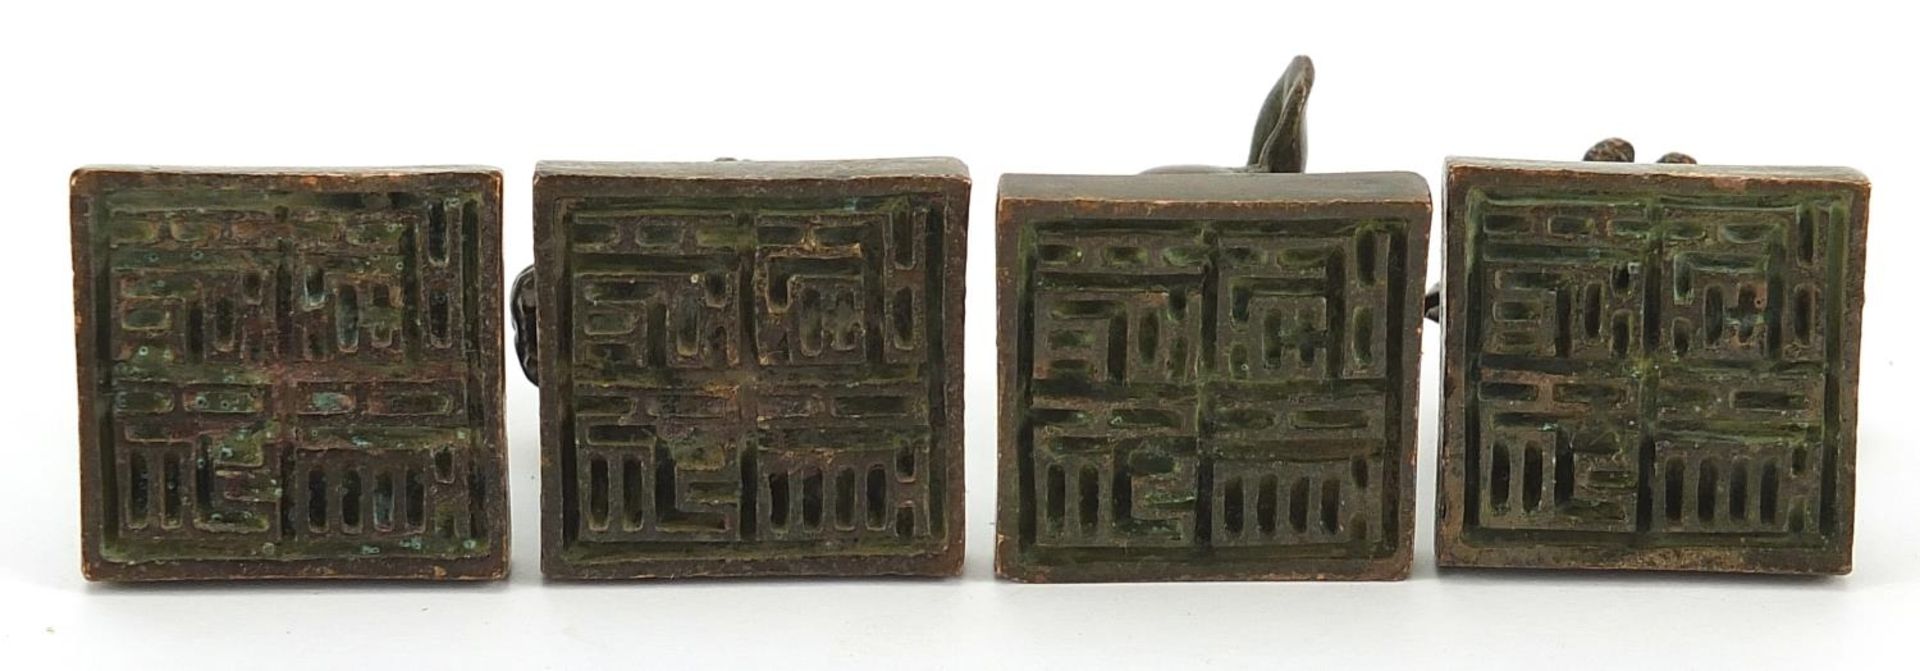 Four Chinese patinated bronze desk seals, the largest 4cm high - Image 3 of 3